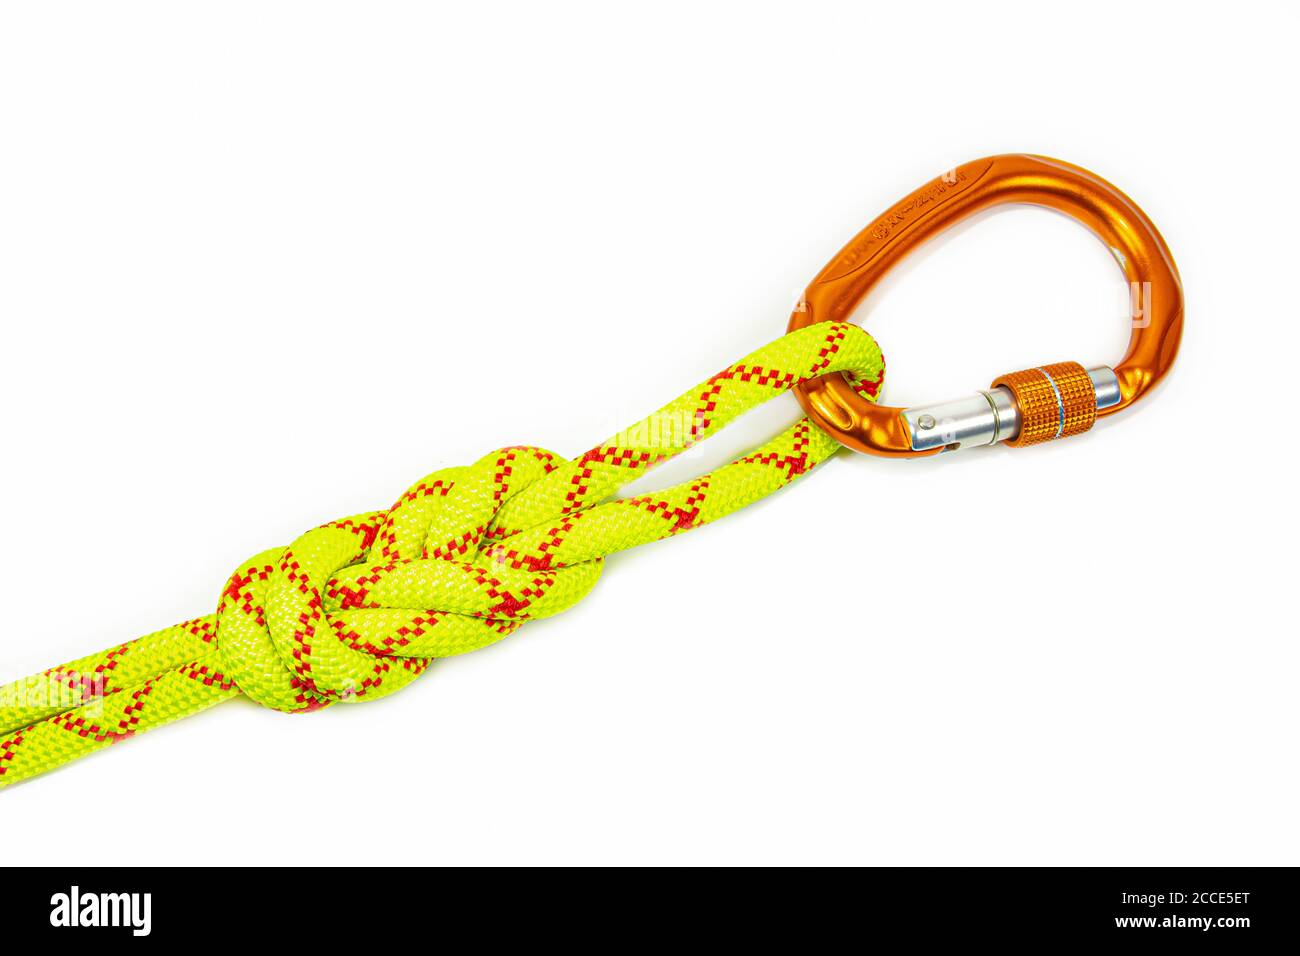 double Flemish loop or figure eight 8 knot with new colored